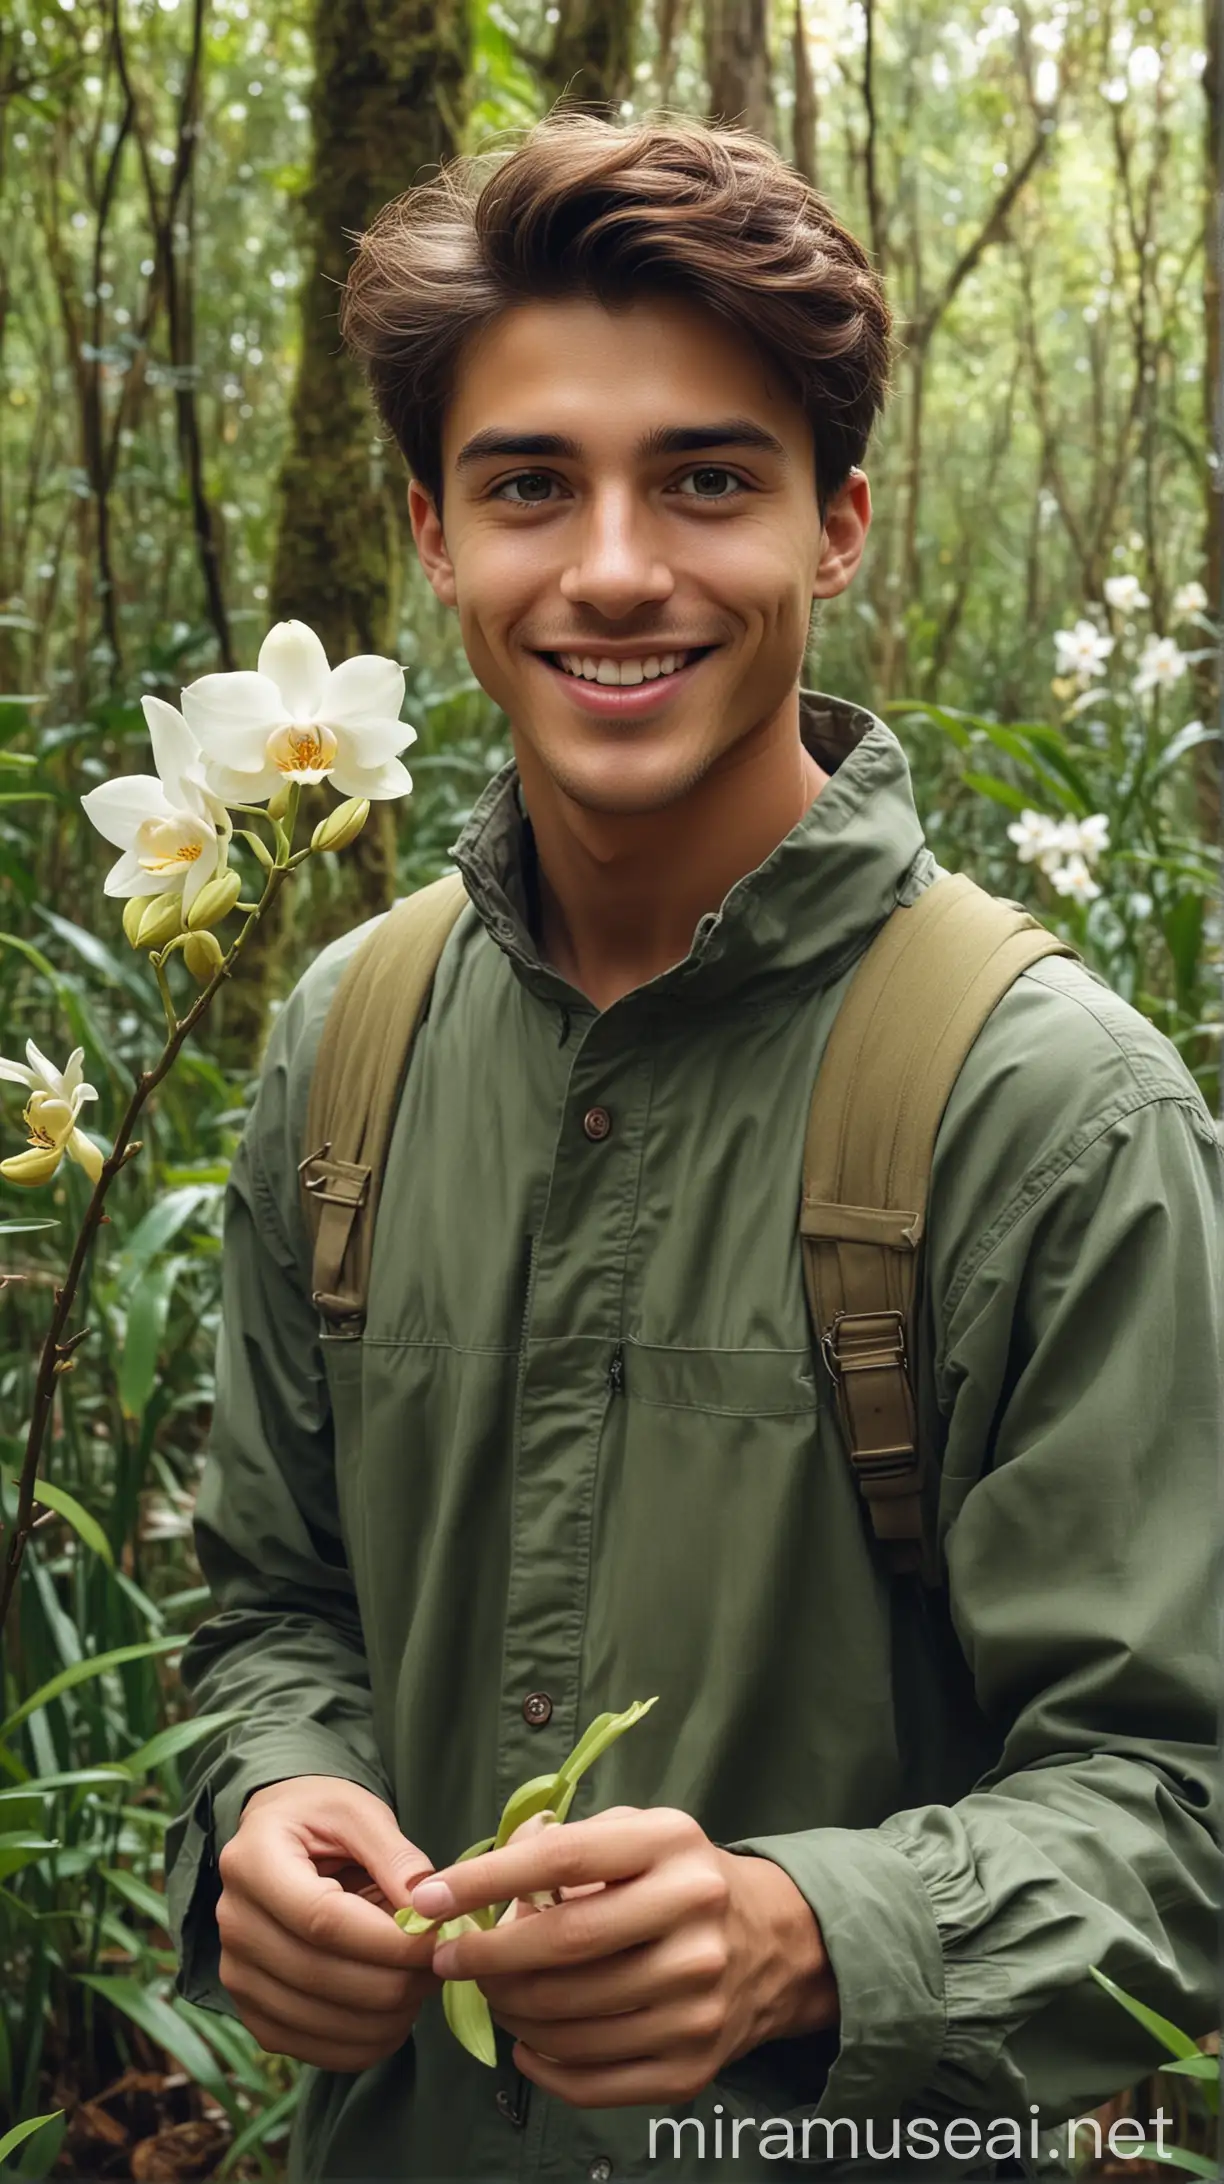 Handsome Young Adventurer Smiling While Picking Rare Orchid in Wilderness Forest